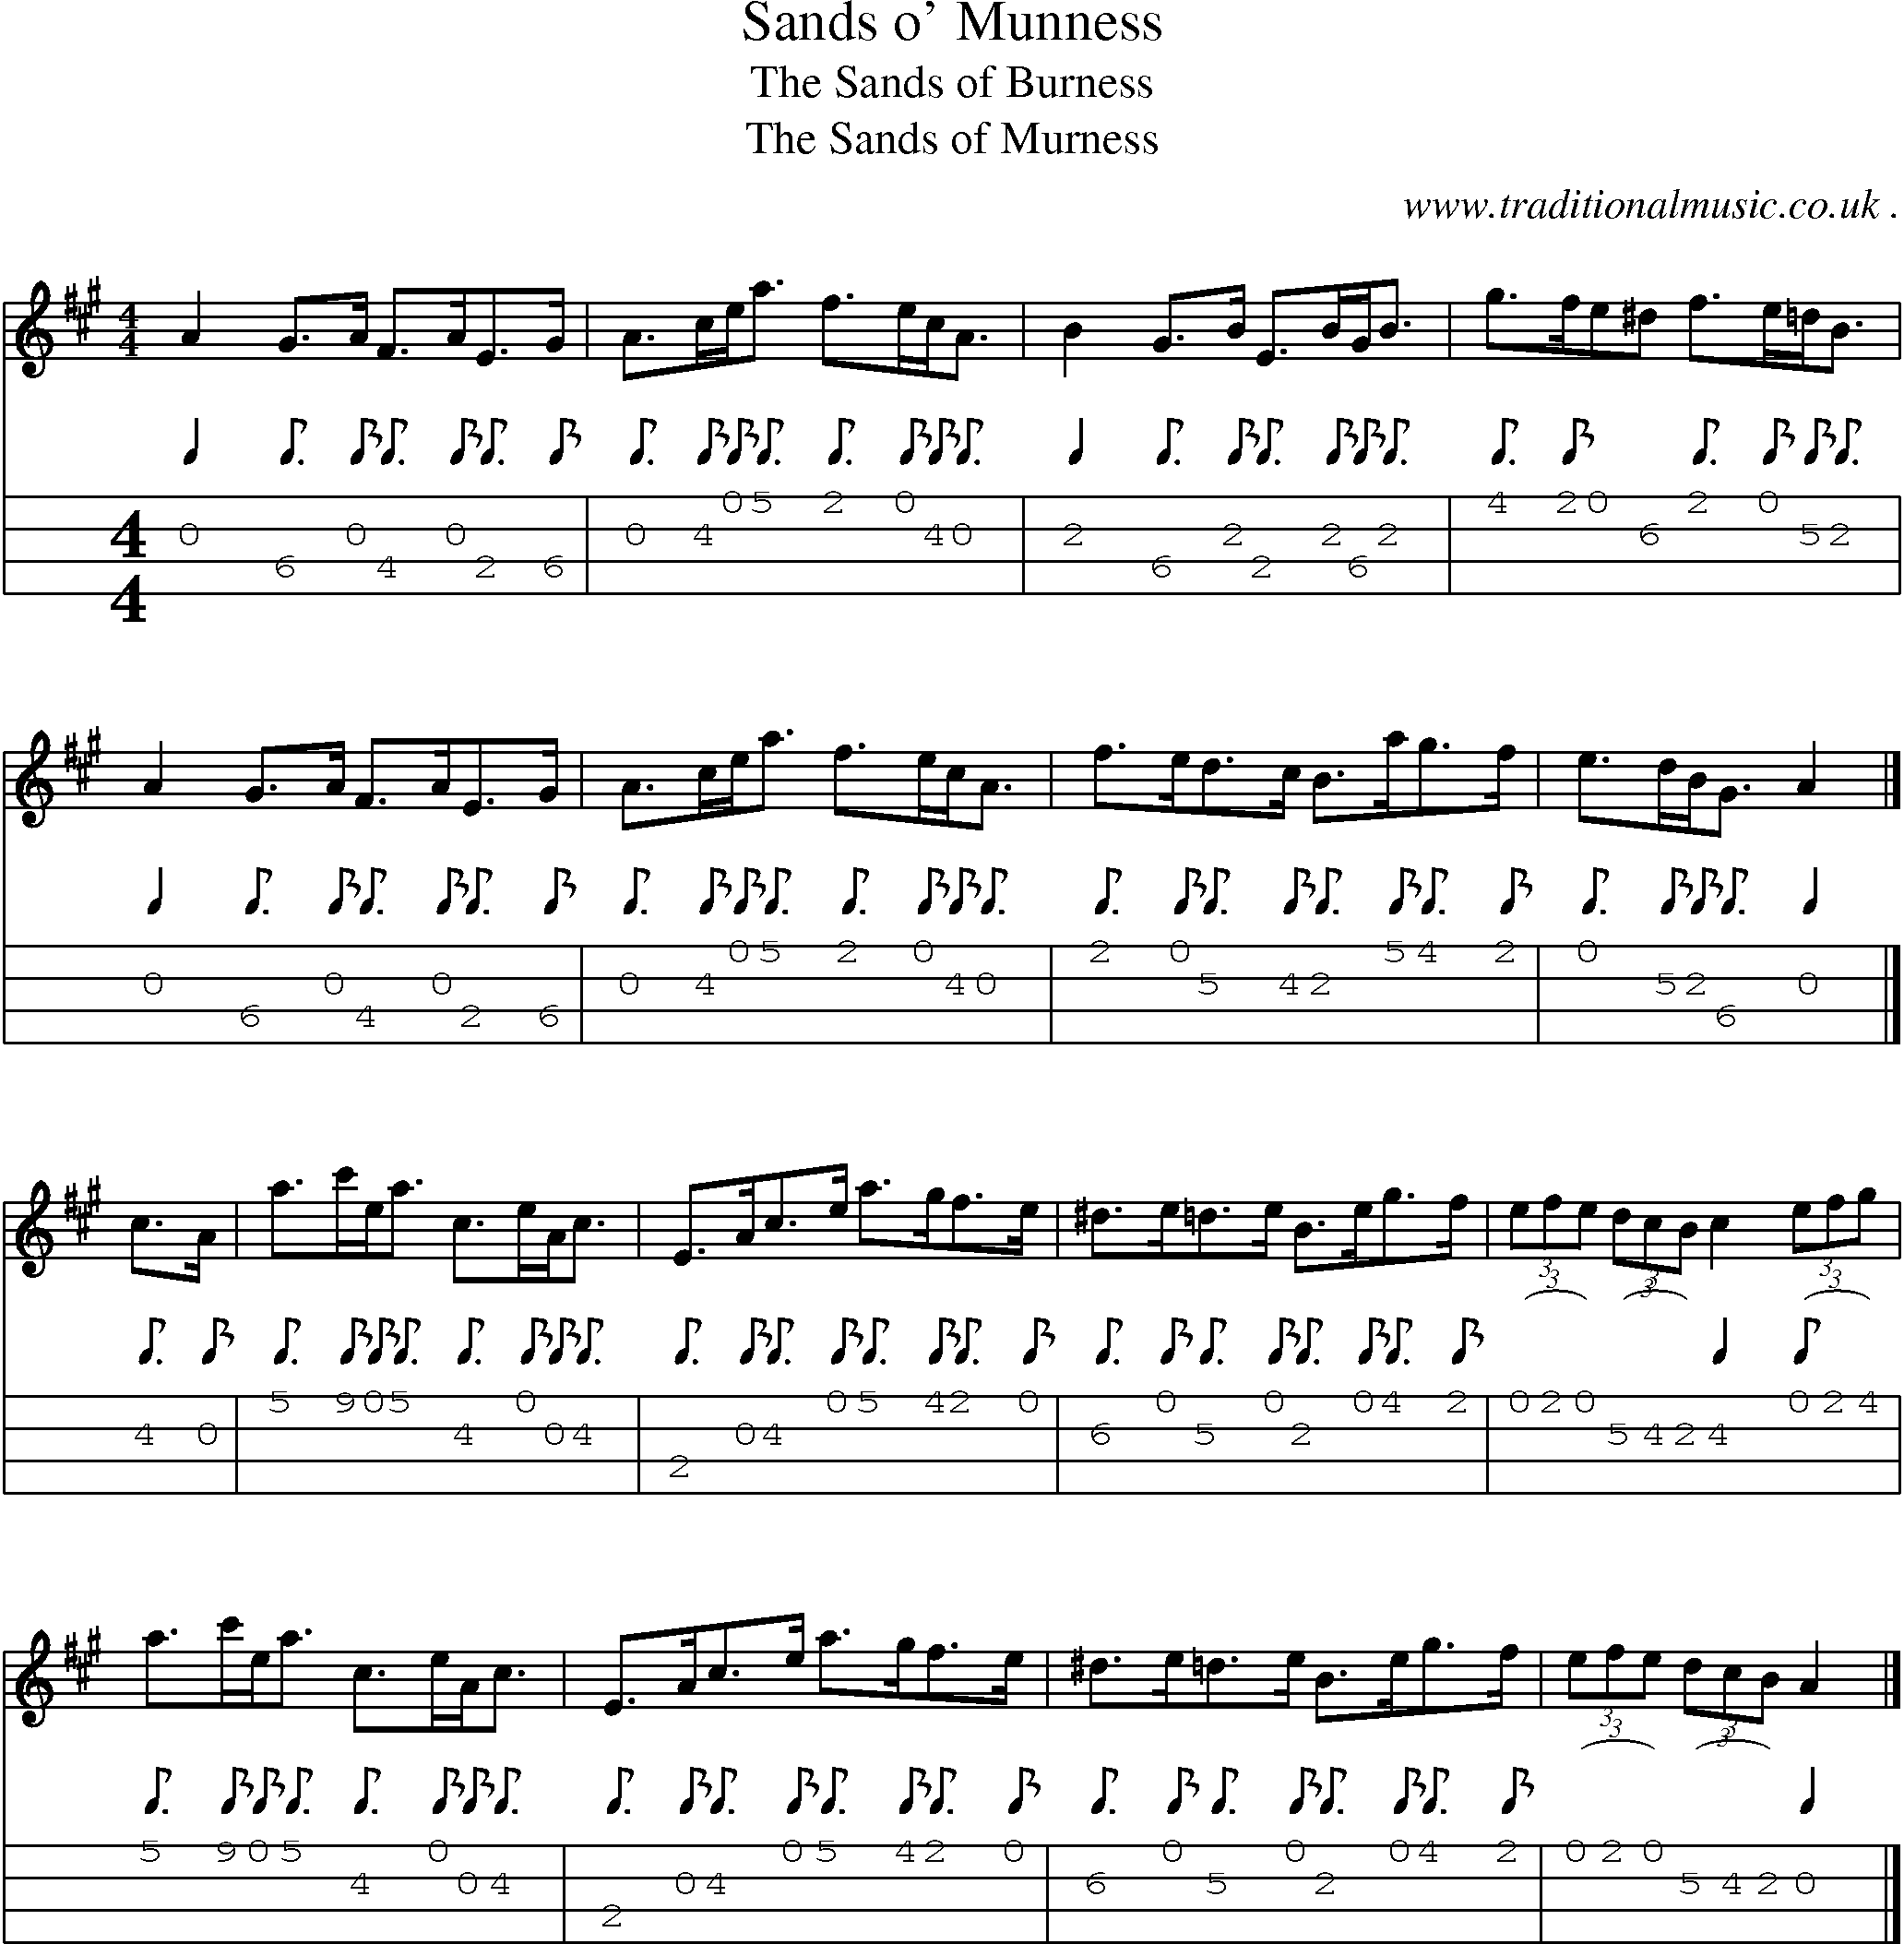 Sheet-music  score, Chords and Mandolin Tabs for Sands O Munness